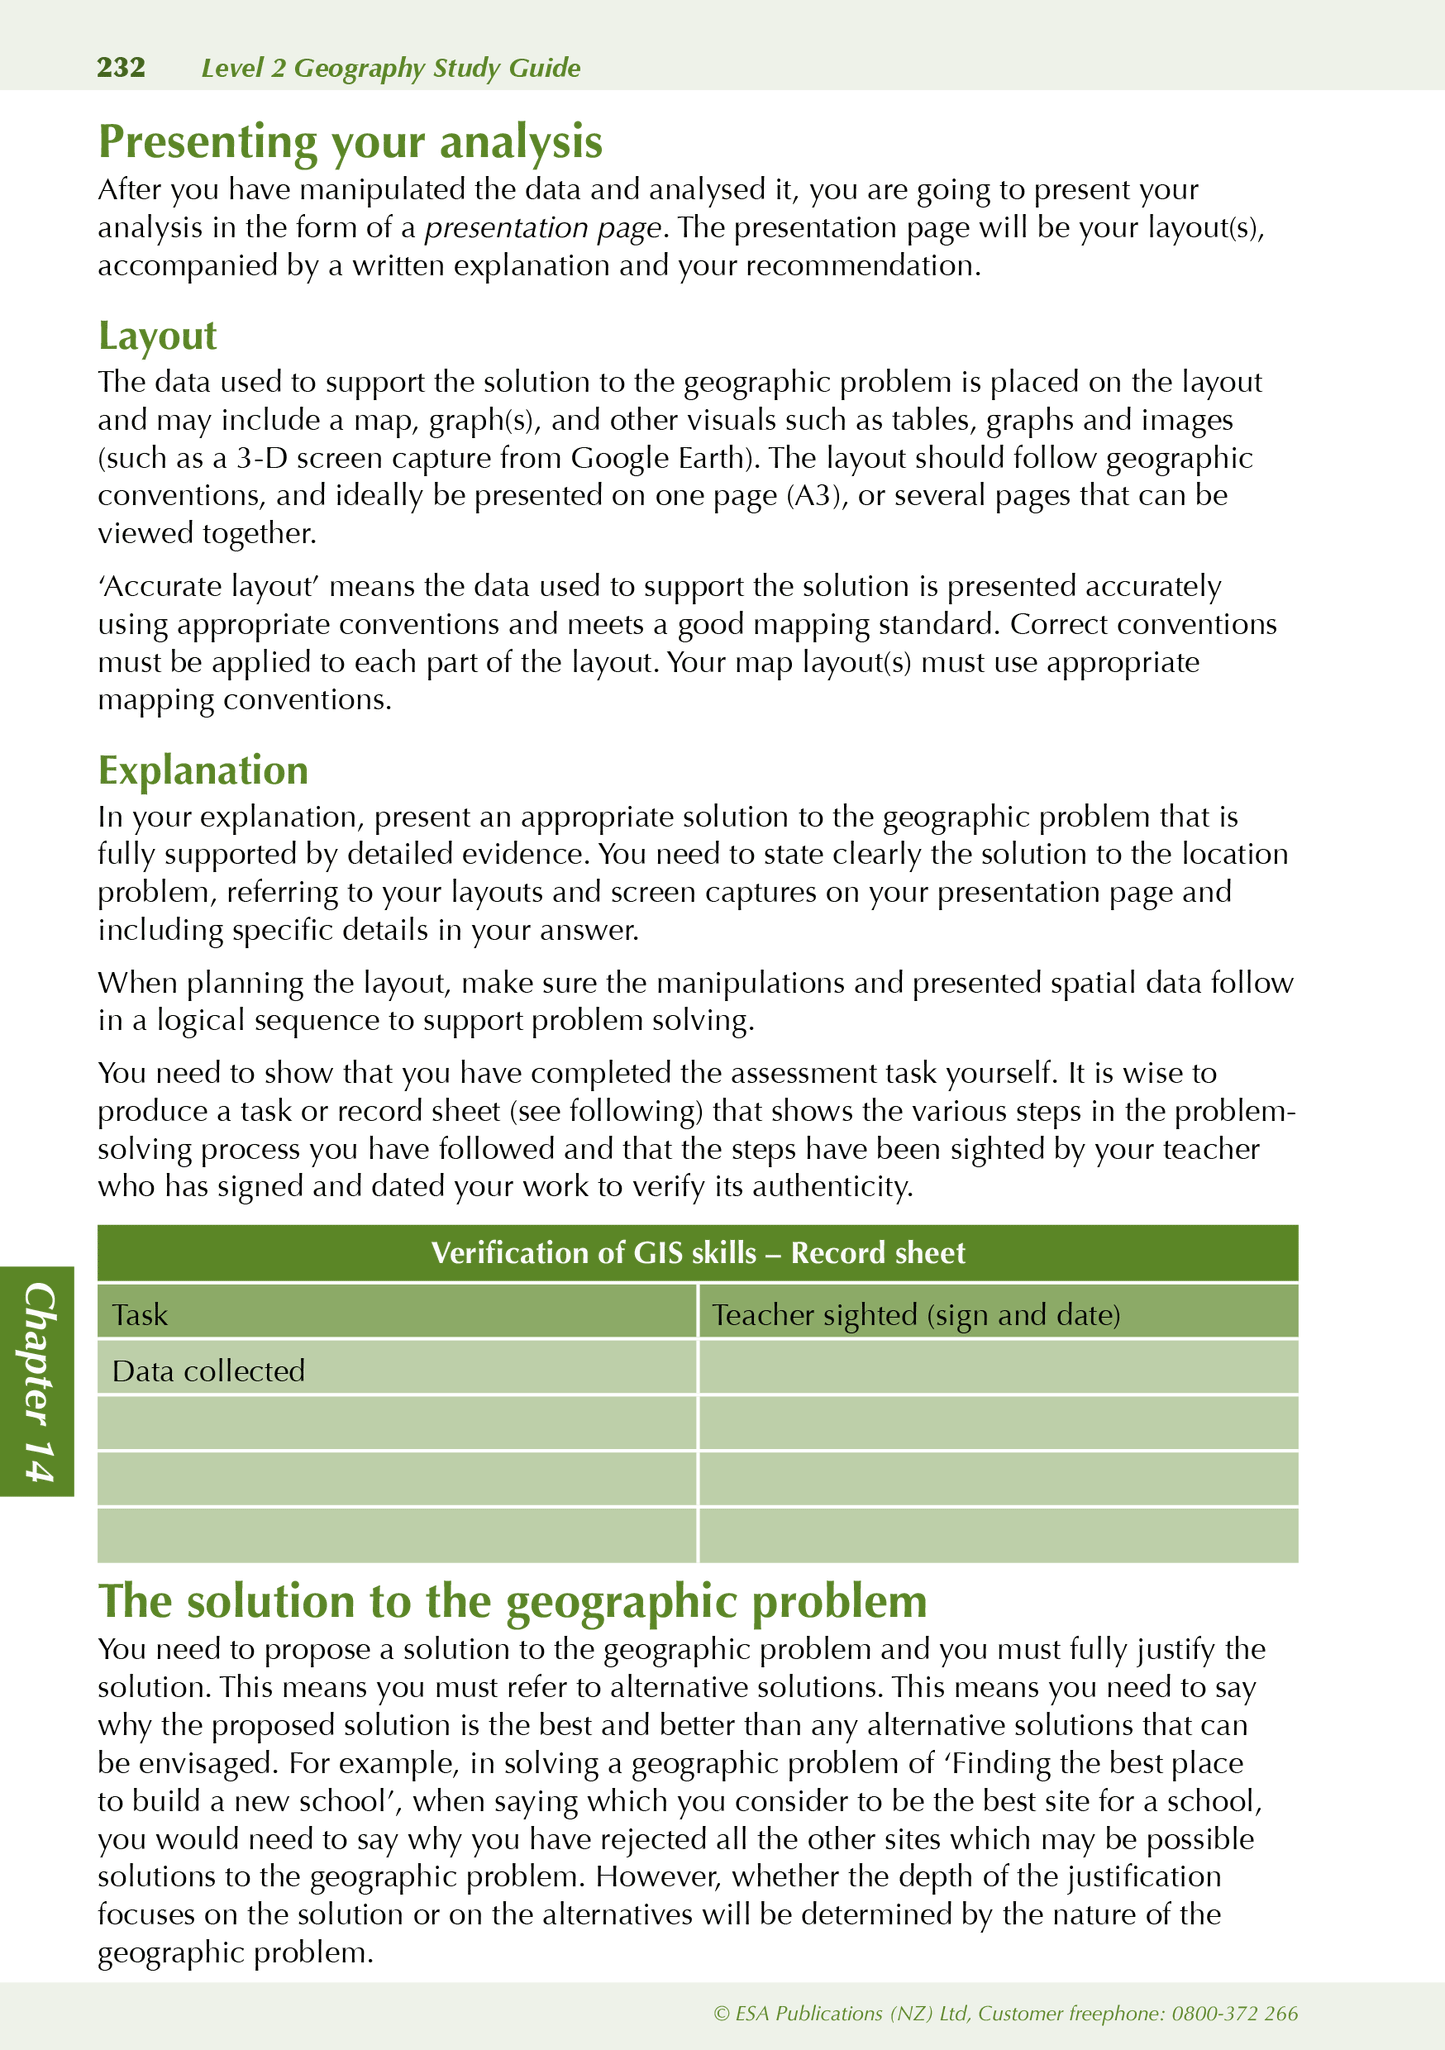 Level 2 Geography ESA Study Guide